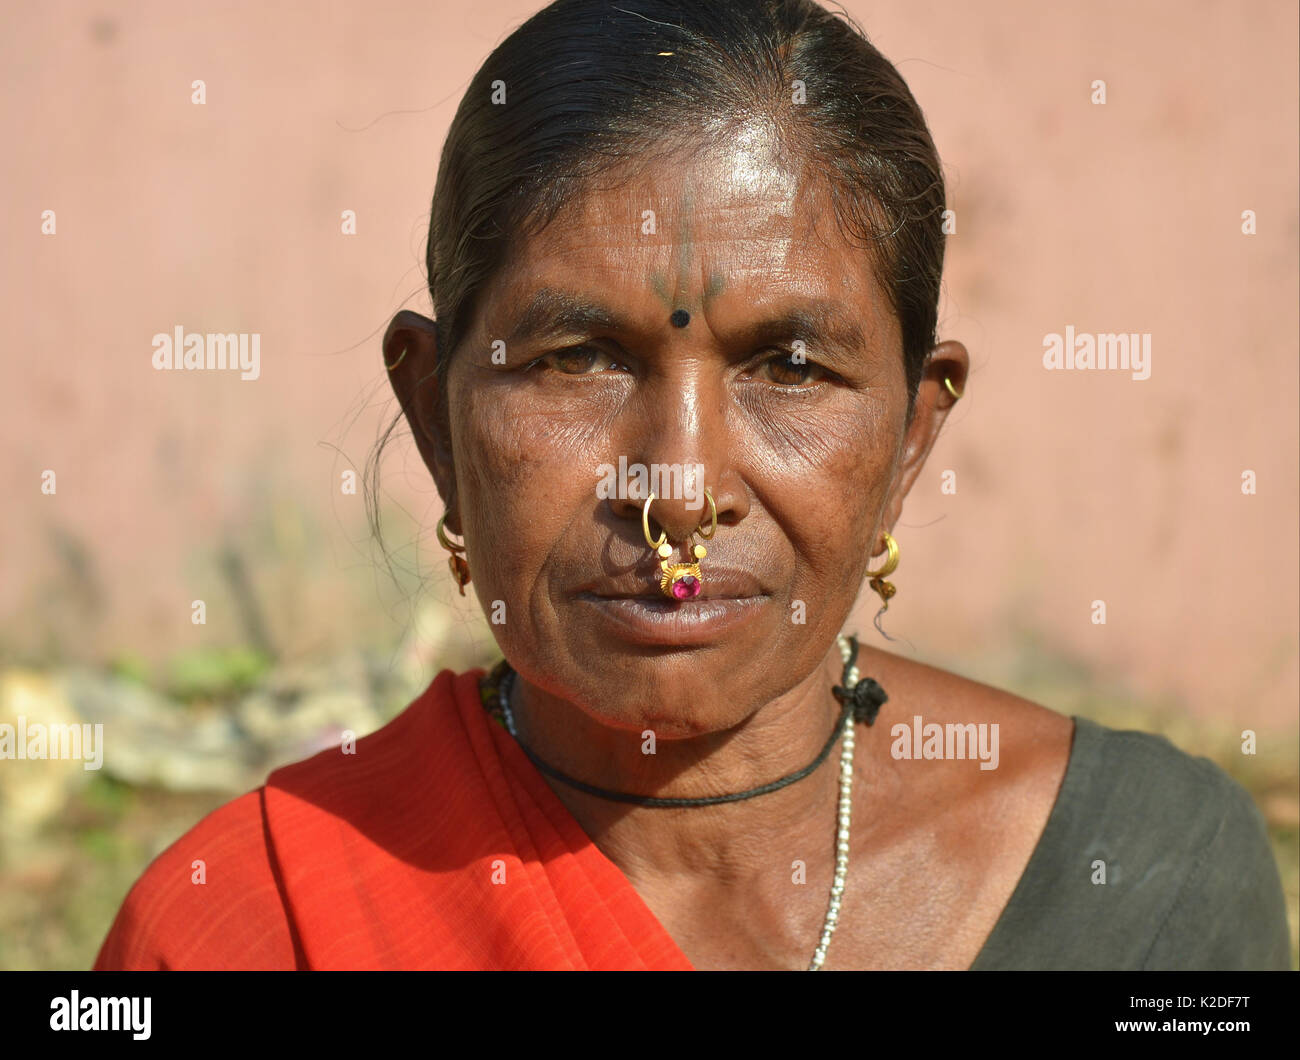 Indian Adivasi woman (Desia Kondh tribe, Kuvi Kondh tribe) with a tattoo on her forehead and gold-and-gemstone nose jewellery poses for the camera. Stock Photo